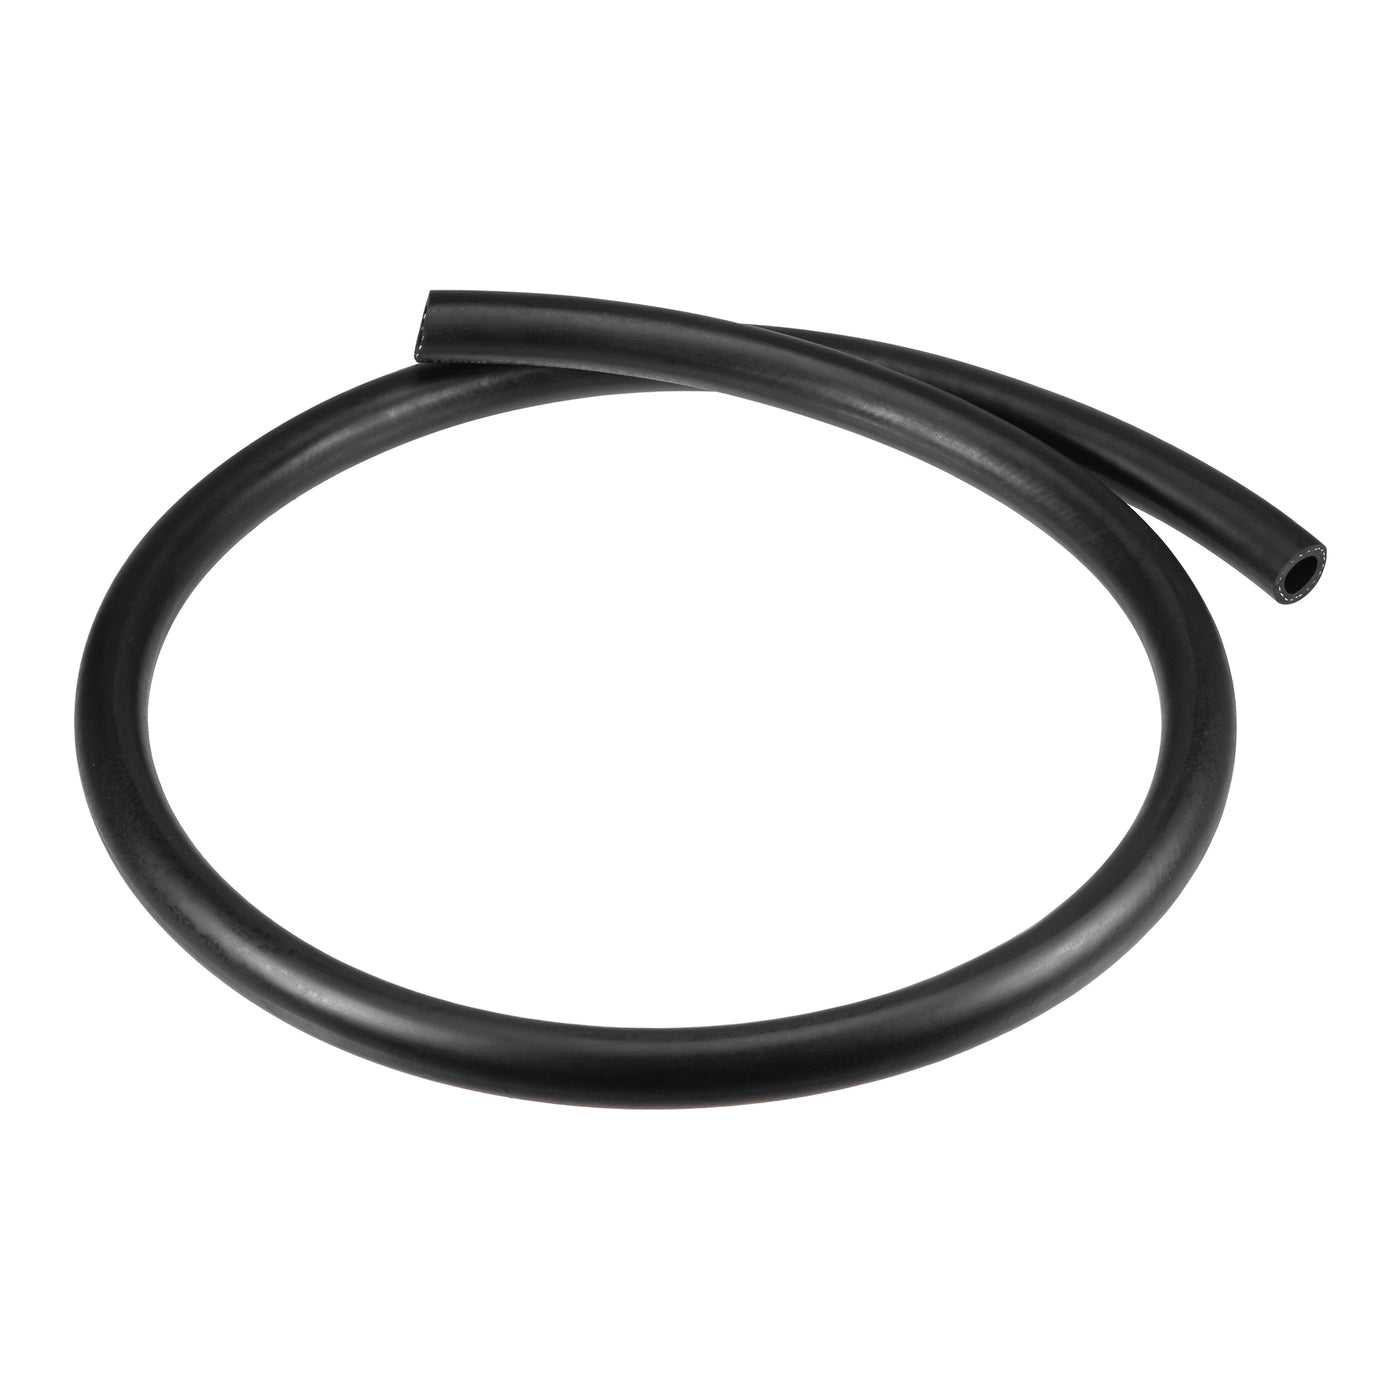 uxcell Uxcell Fuel Line Hose, Oil Hose for Small Engine